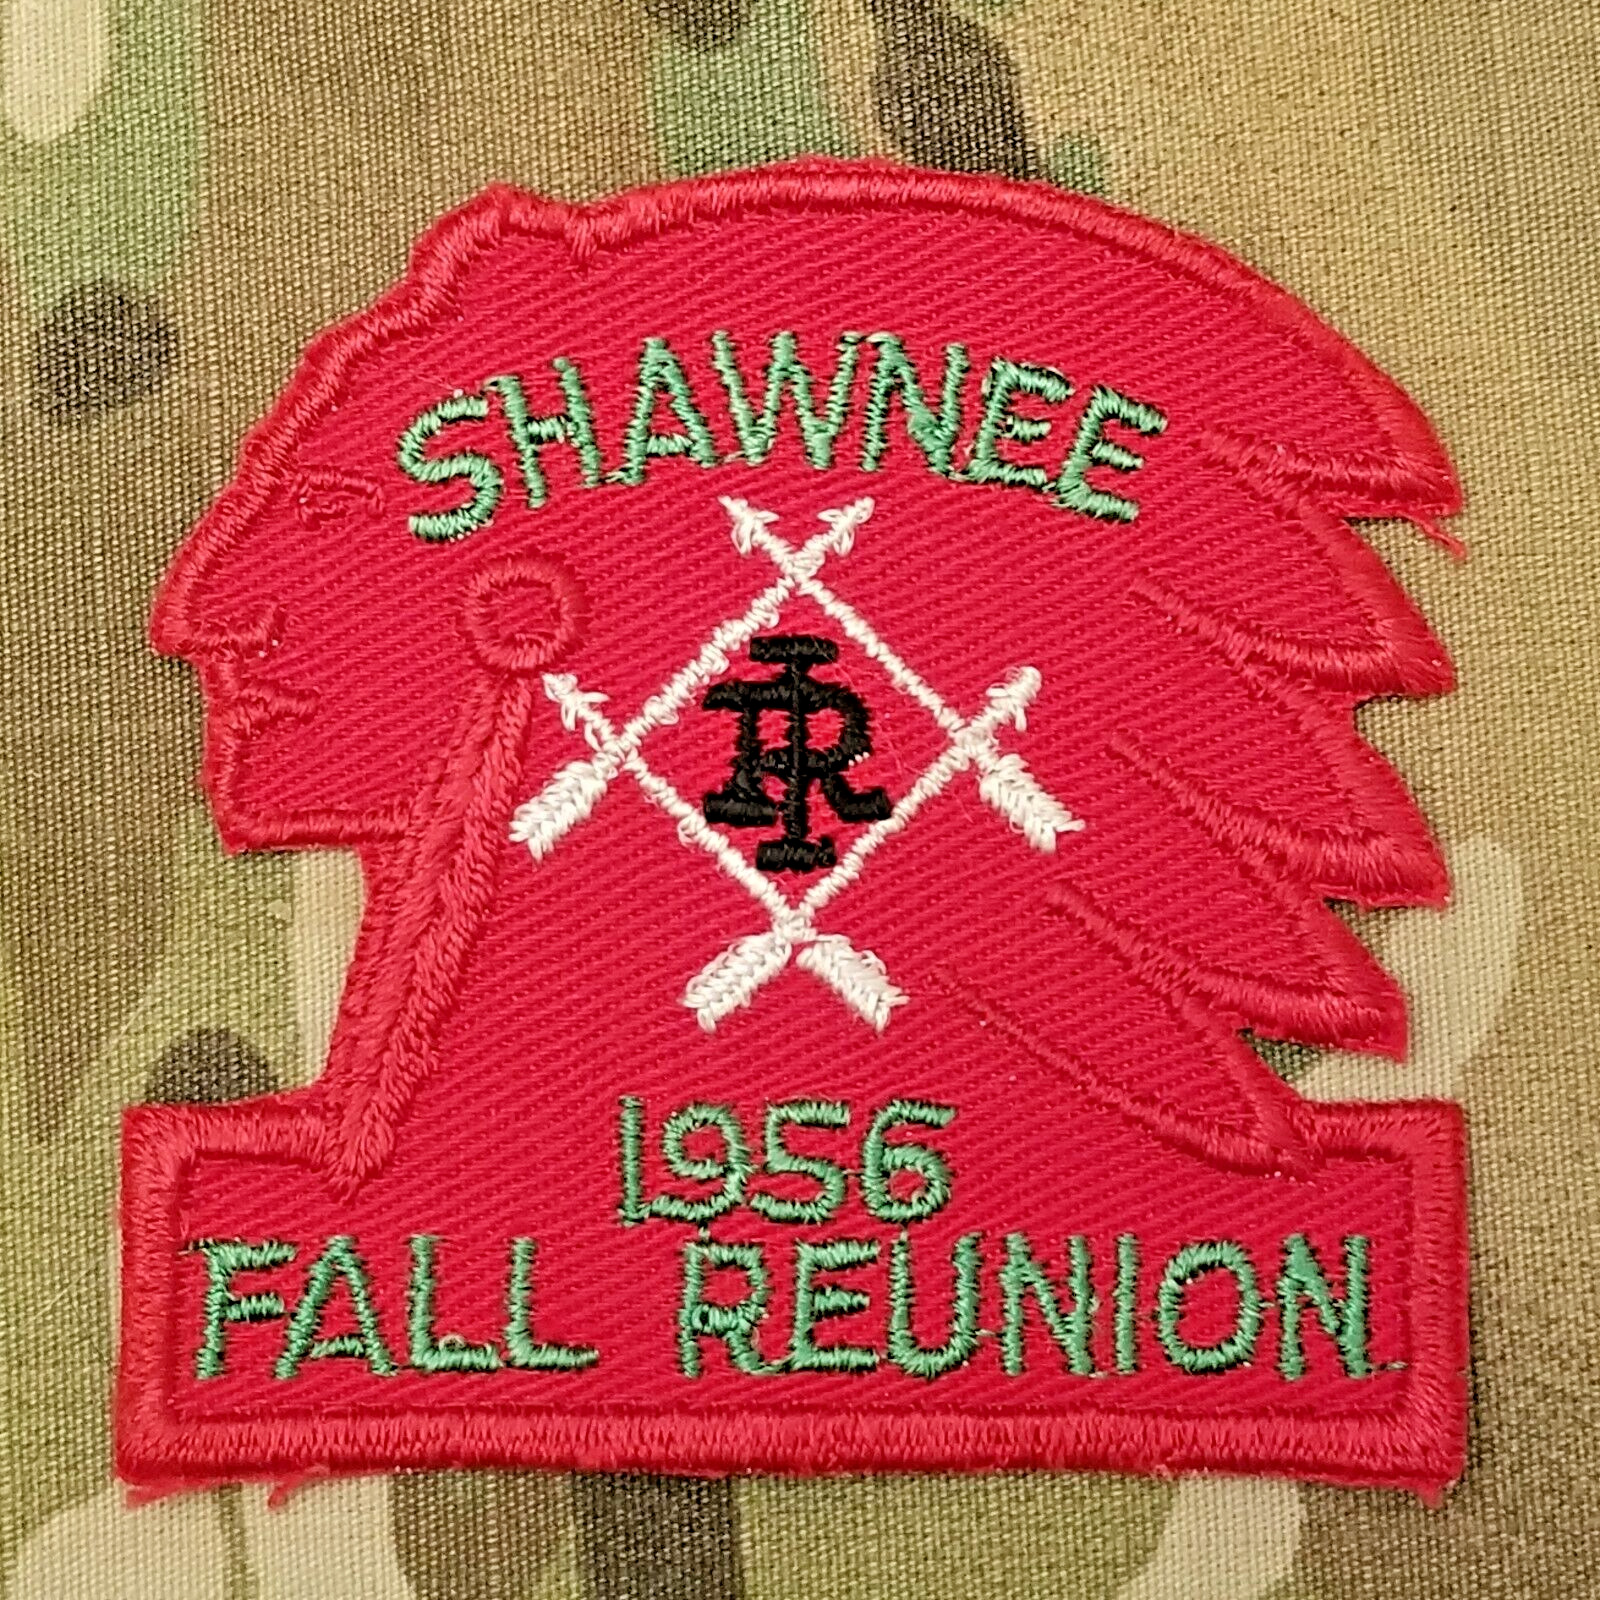 ORDER OF THE ARROW , SHAWNEE LODGE 51,  1956 FALL REUNION, CAMP IRON DALE PATCH